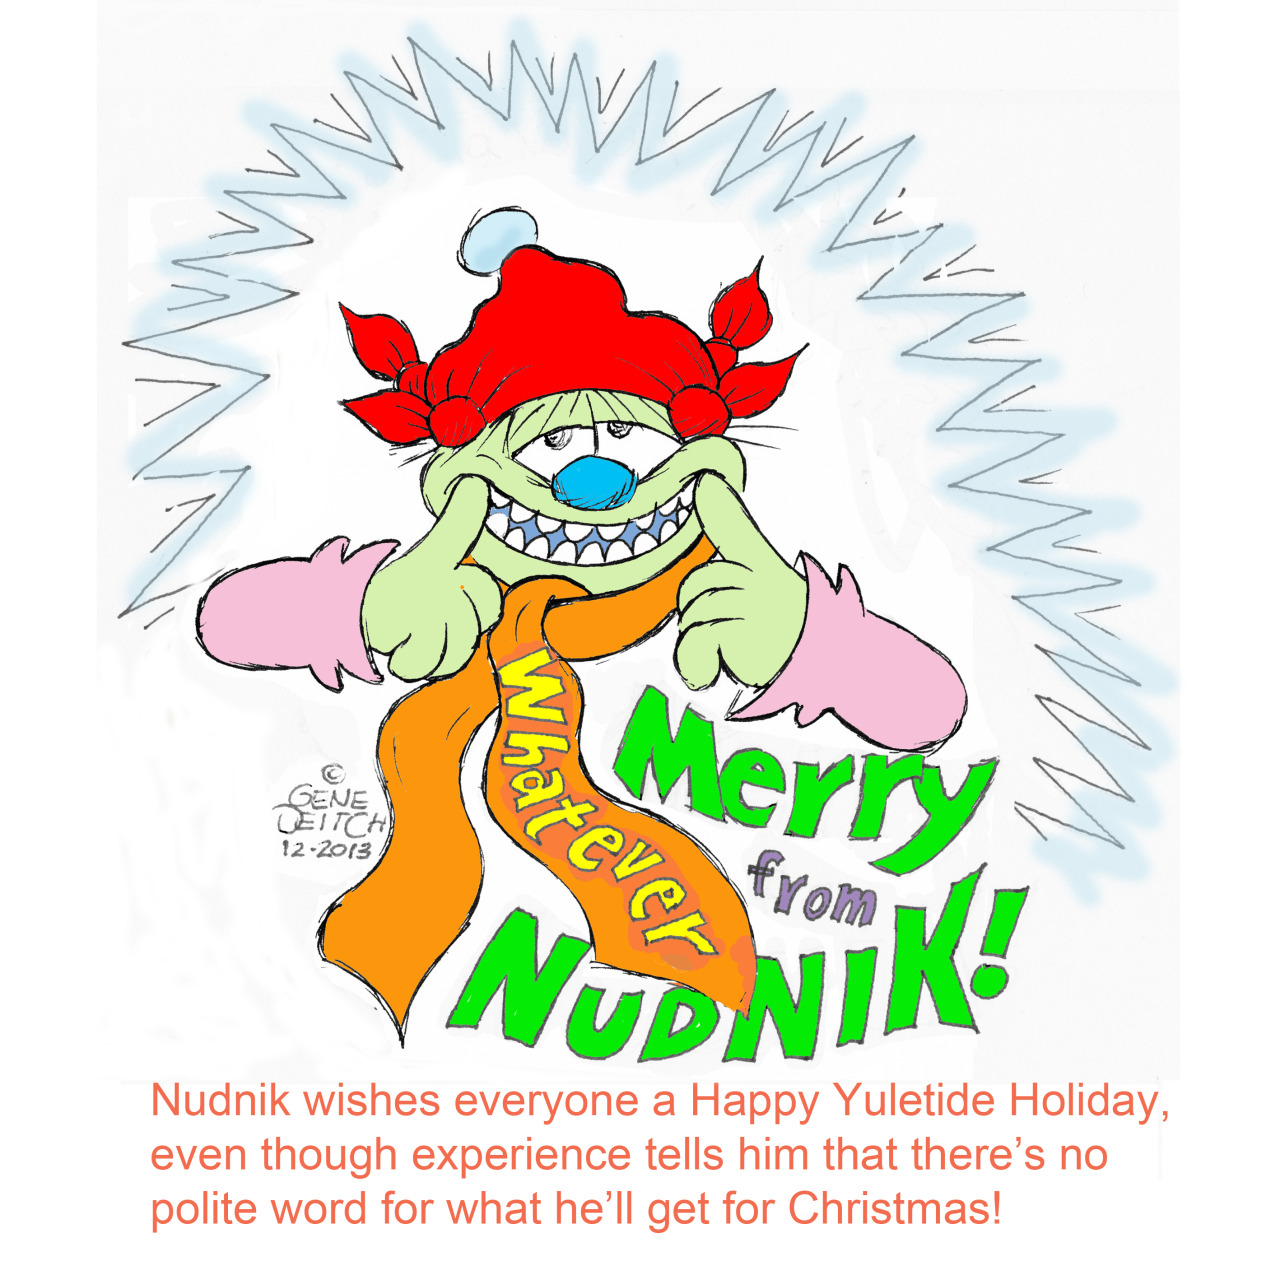 nudnikrevealed: NUDNIK wishes everyone a Happy Yuletide Holiday, even though experience tells him that there’s no polite word for what he’ll get for Christmas! Merry Christmas from NUDNIK, Gene, and the Rembrandt Films crew! xoxo  Buy: Nudnik Revealed on DVD http://www.rembrandtfilms.com/nudnik.htm &amp; Book http://www.fantagraphics.com/browse-shop/nudnik-revealed.html?vmcchk=1Follow: Tumblr http://nudnikrevealed.tumblr.com/ &amp; Twitter https://twitter.com/nudnikrevealed 